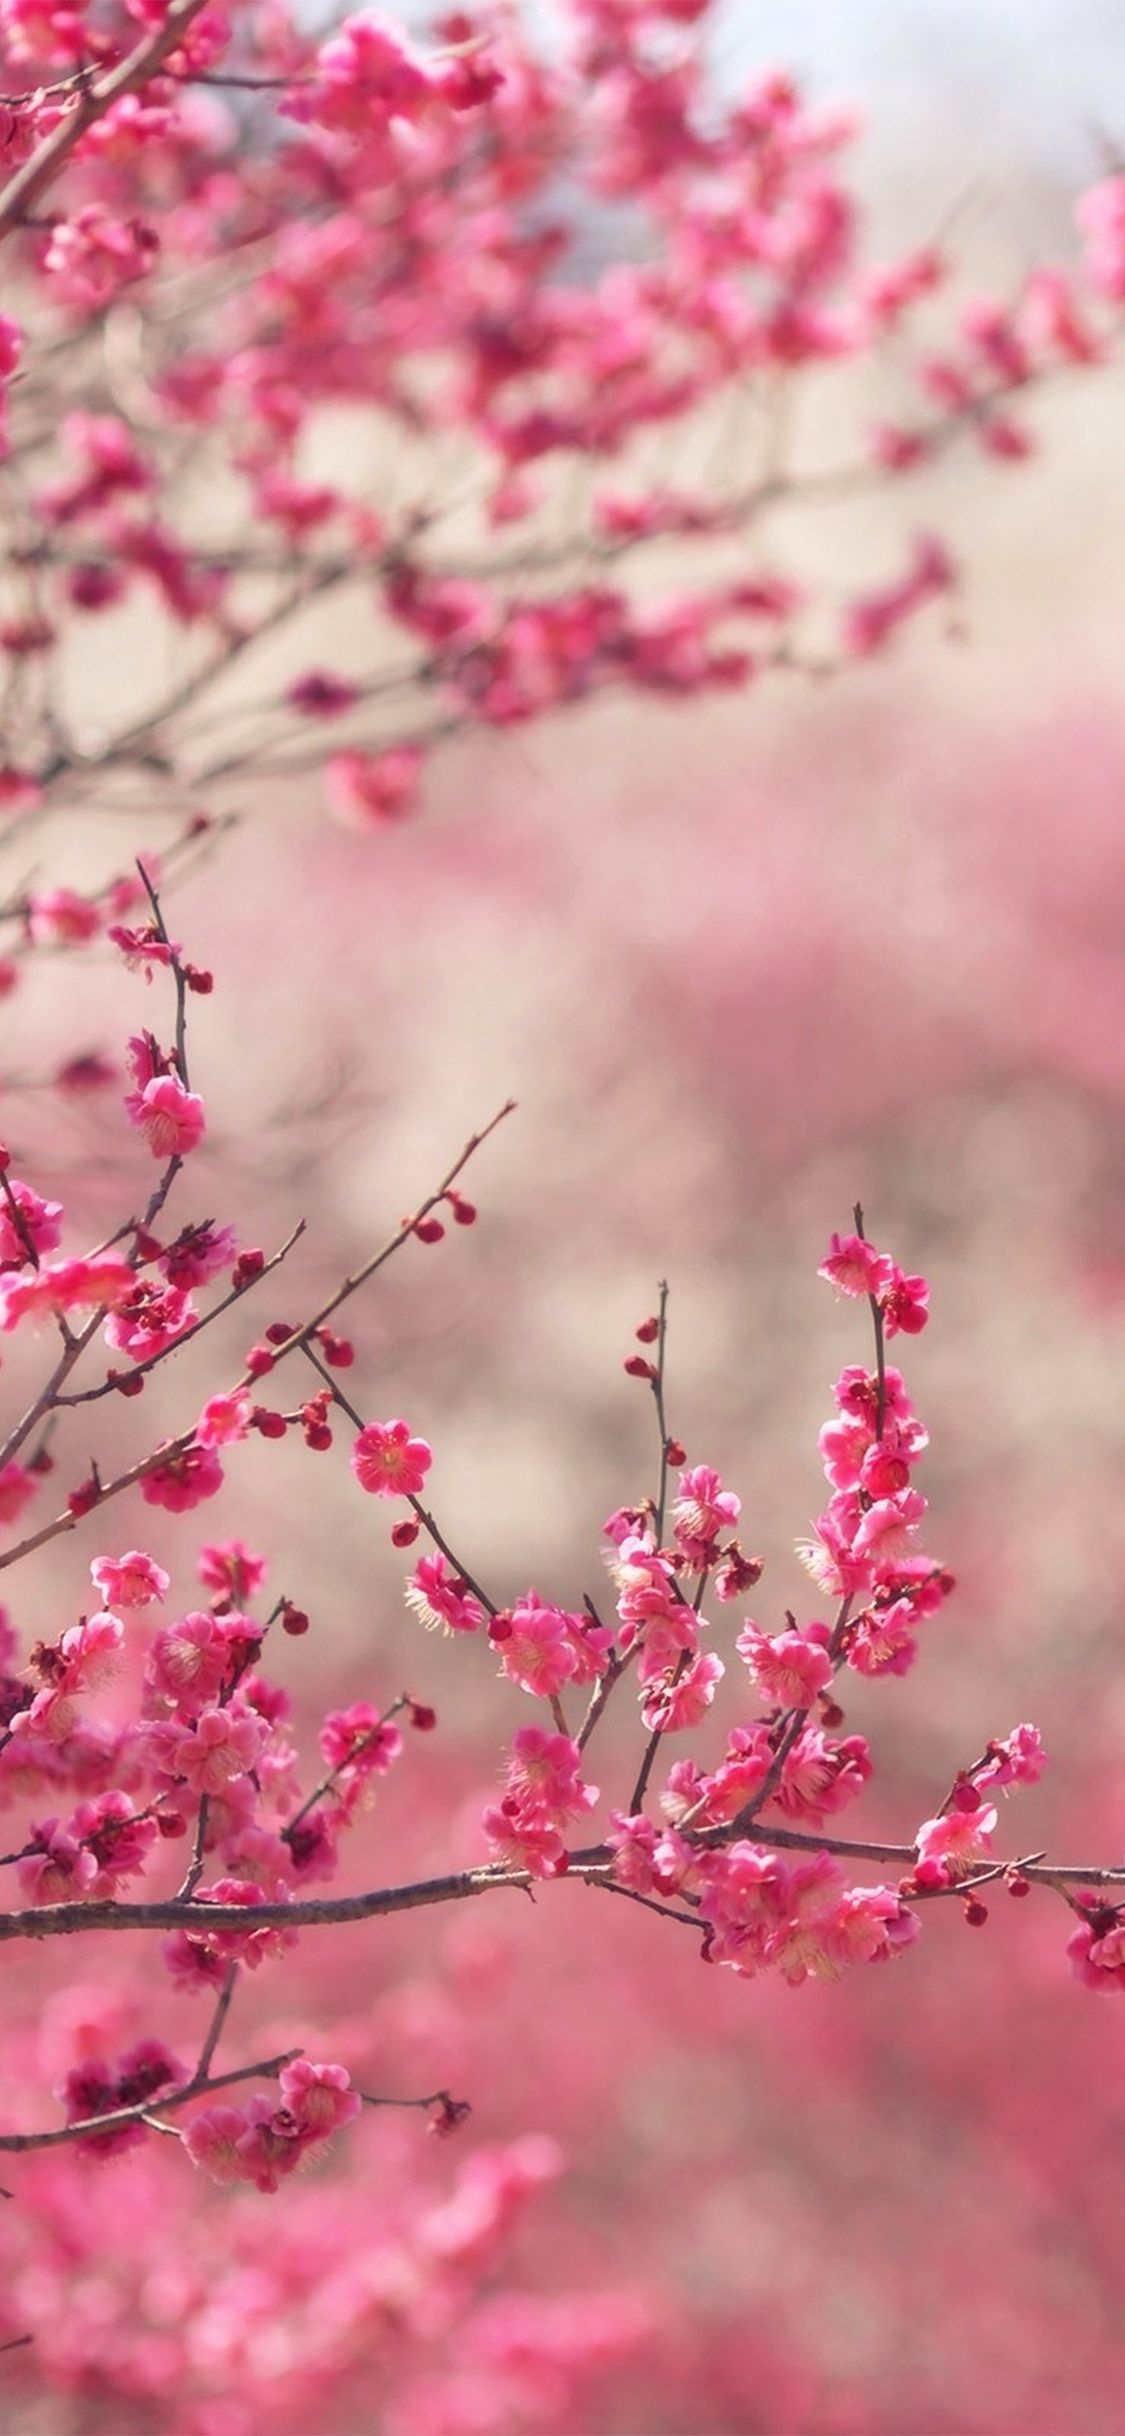 iPhone X wallpaper. pink blossom nature flower spring